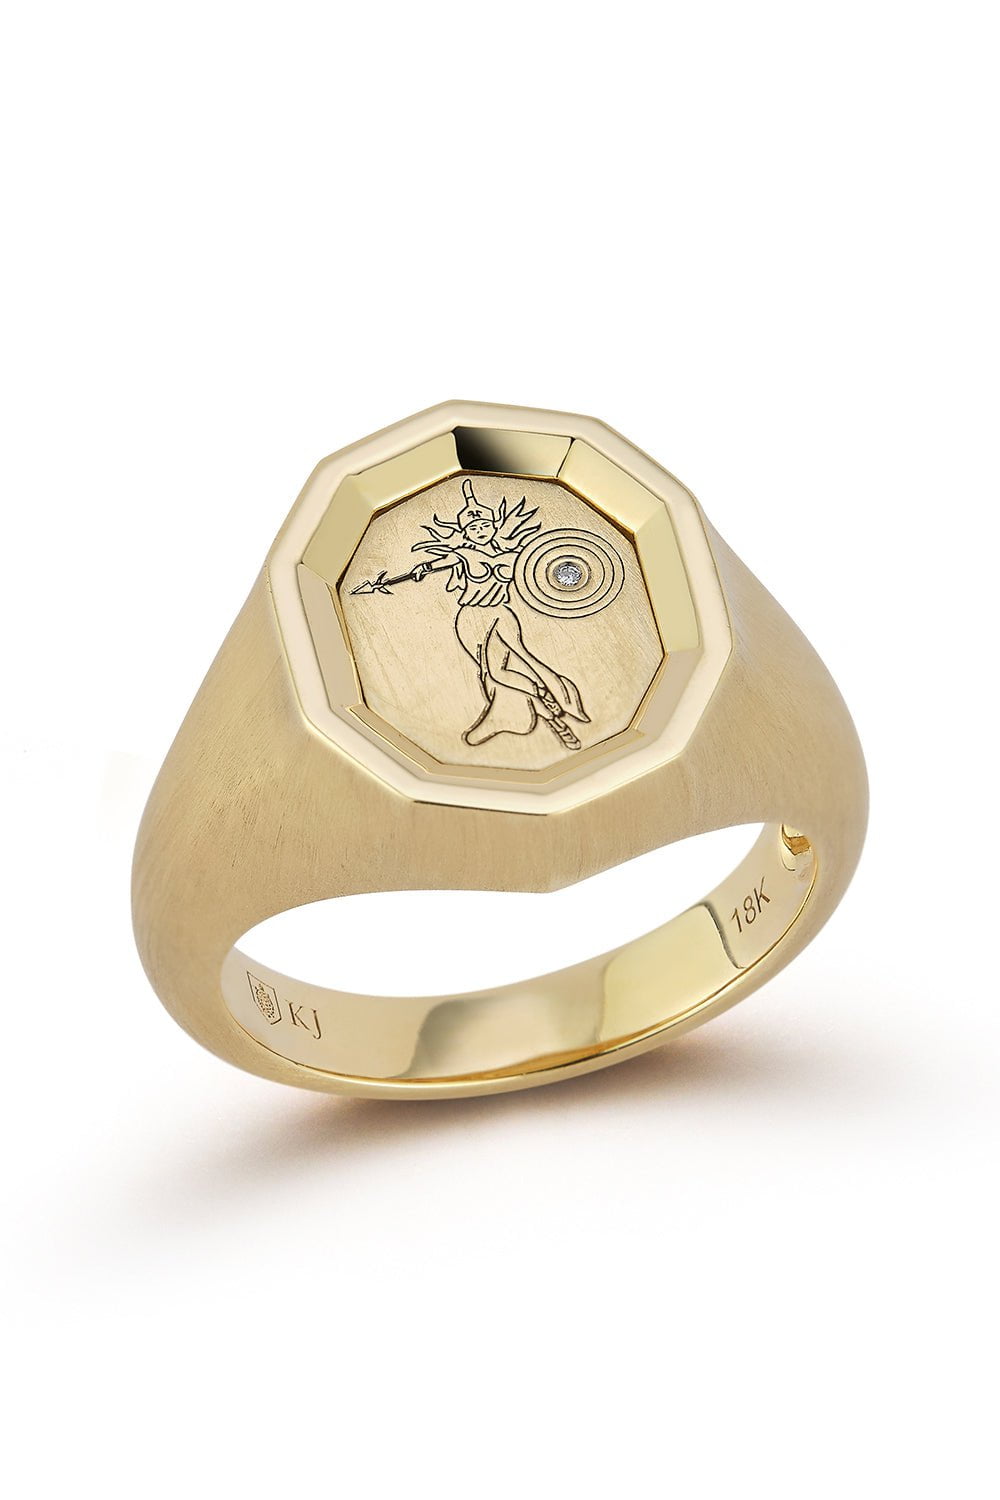 KATHERINE JETTER-The Athena Ring-YELLOW GOLD